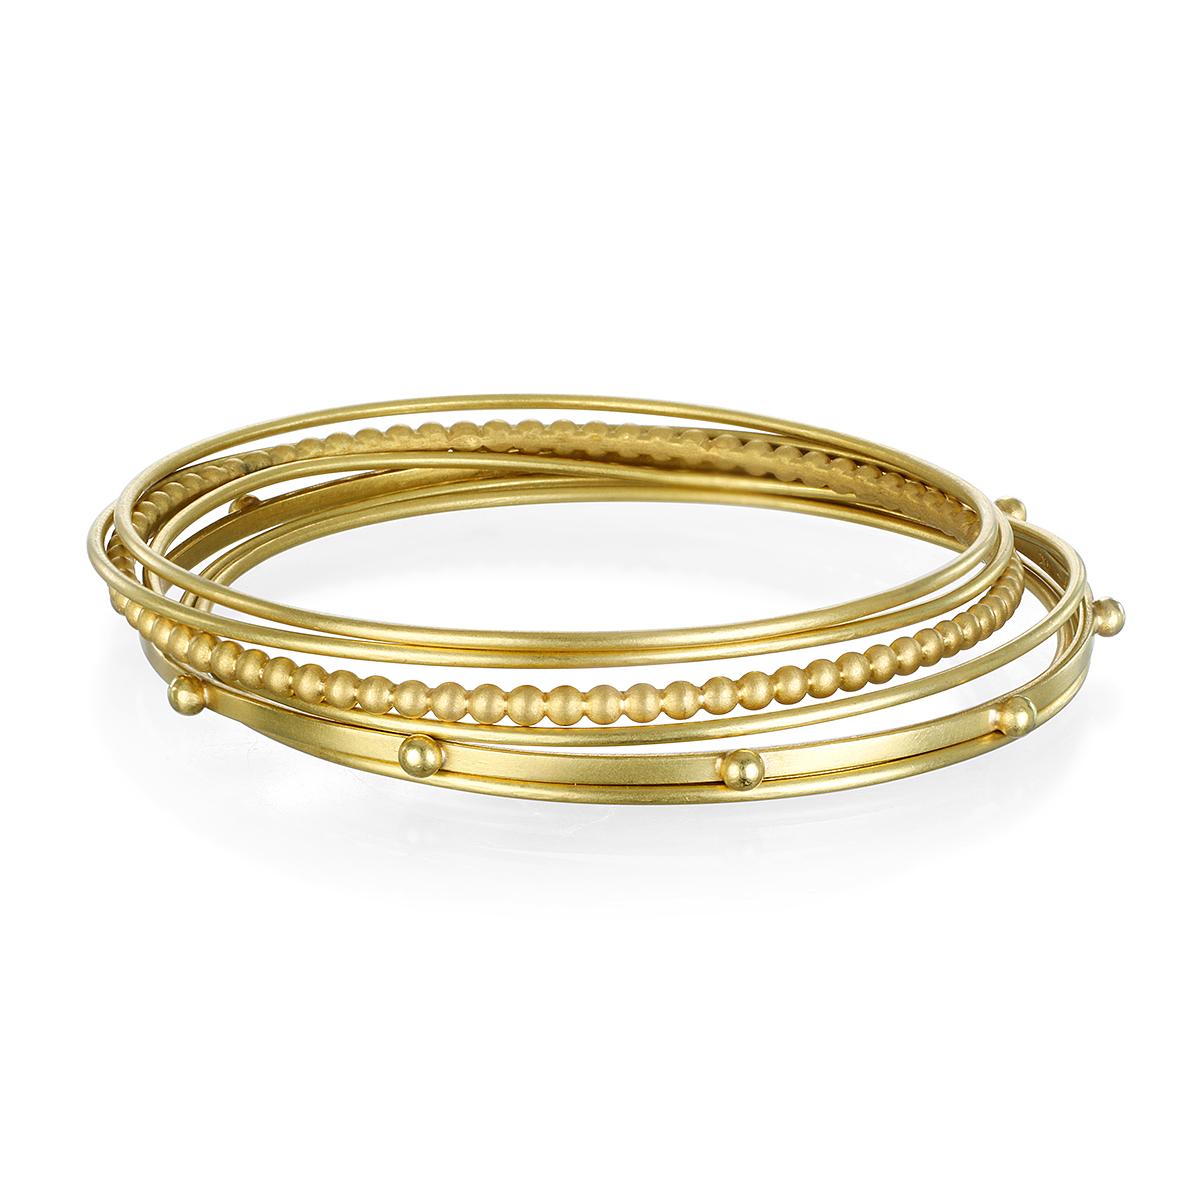 Faye Kim's signature granulation bangle in solid 18k gold* is one of many, designed to wear alone or stack for the ultimate layered look.
Beautifully handcrafted and matte finished. 

*In Faye Kim's signature 18k green gold, an alloy comprising 75%